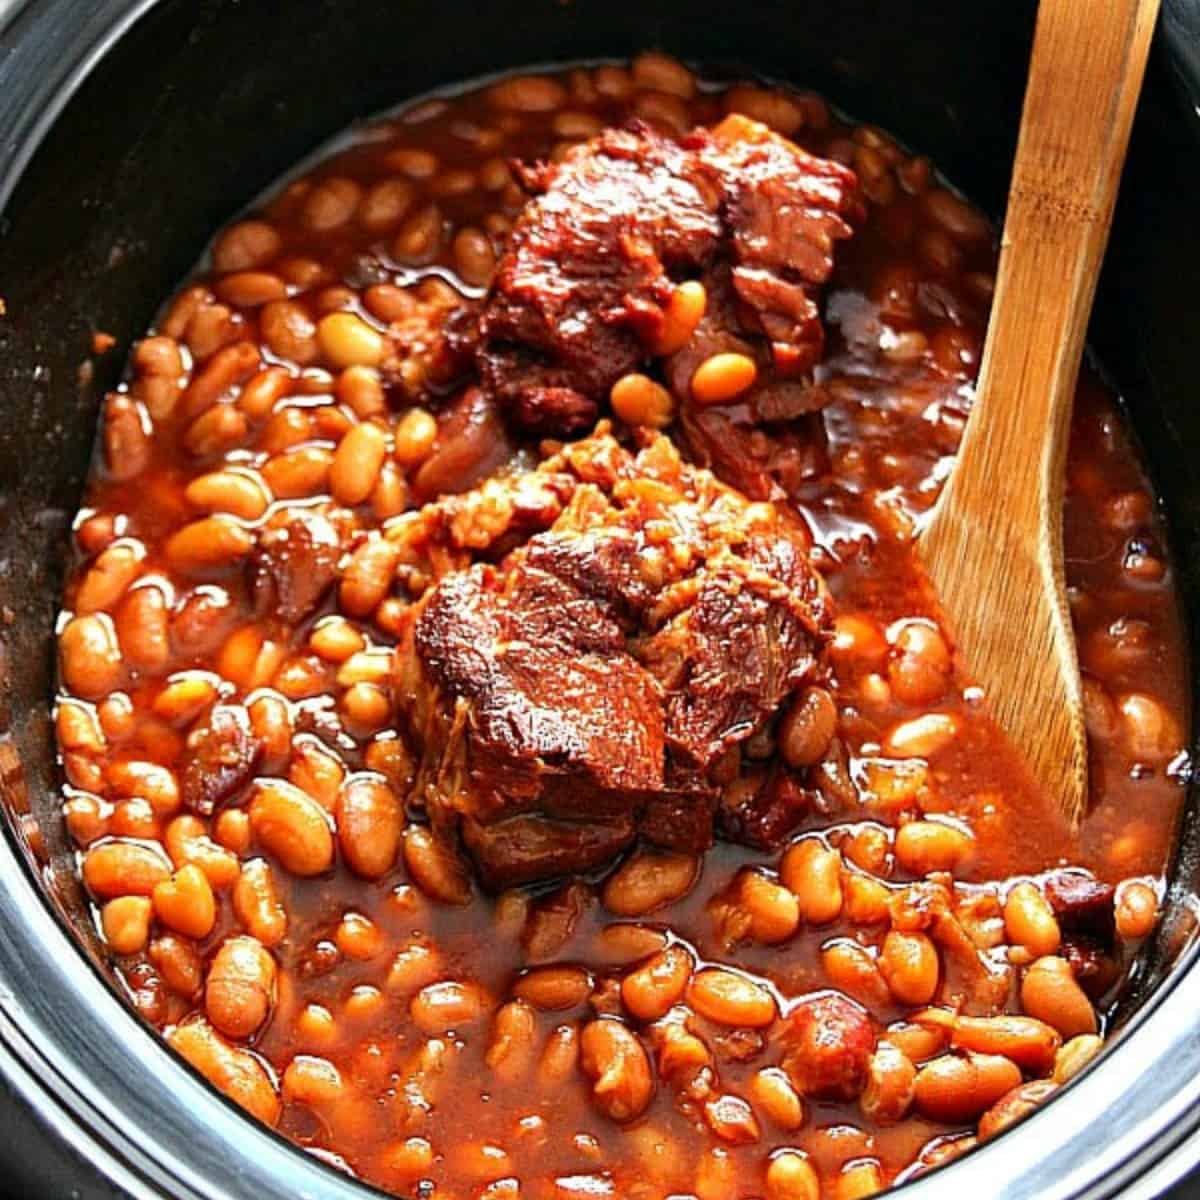 Baked beans with ham shank in a slow cooker.